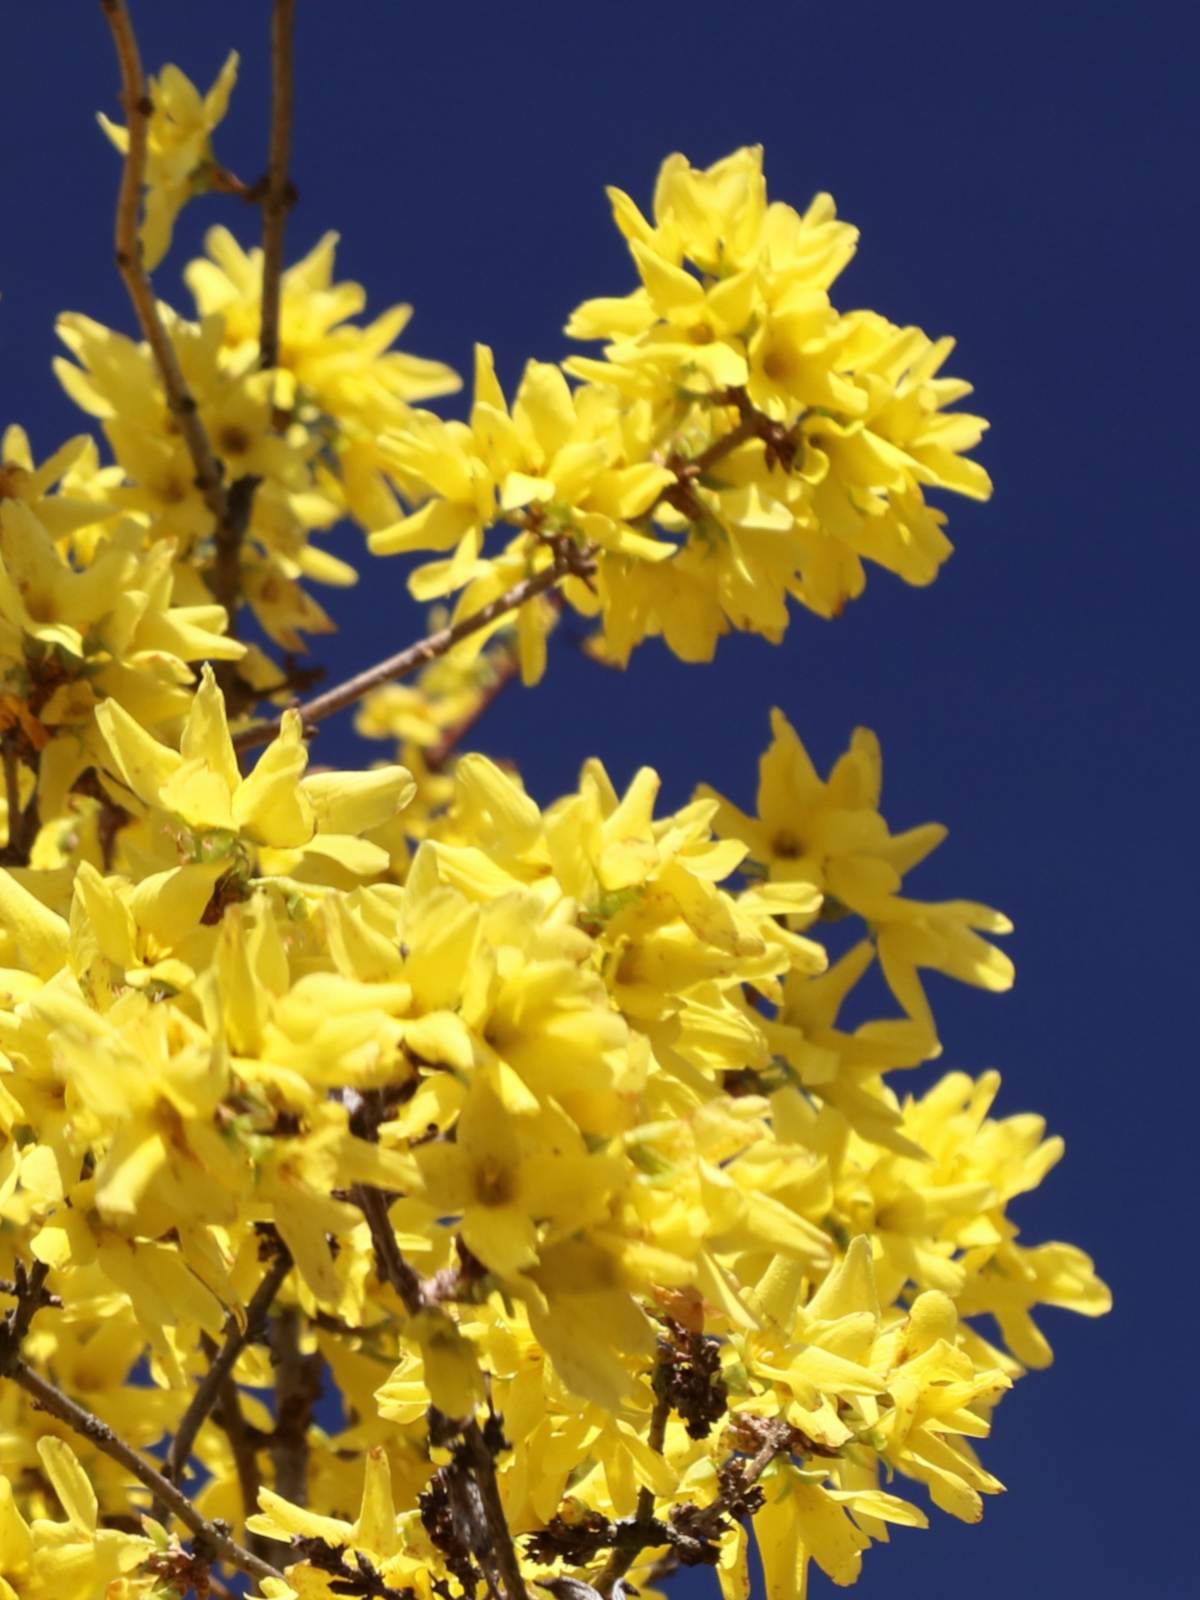 Bright contrast between deep blue sky and bright forsythia yellow